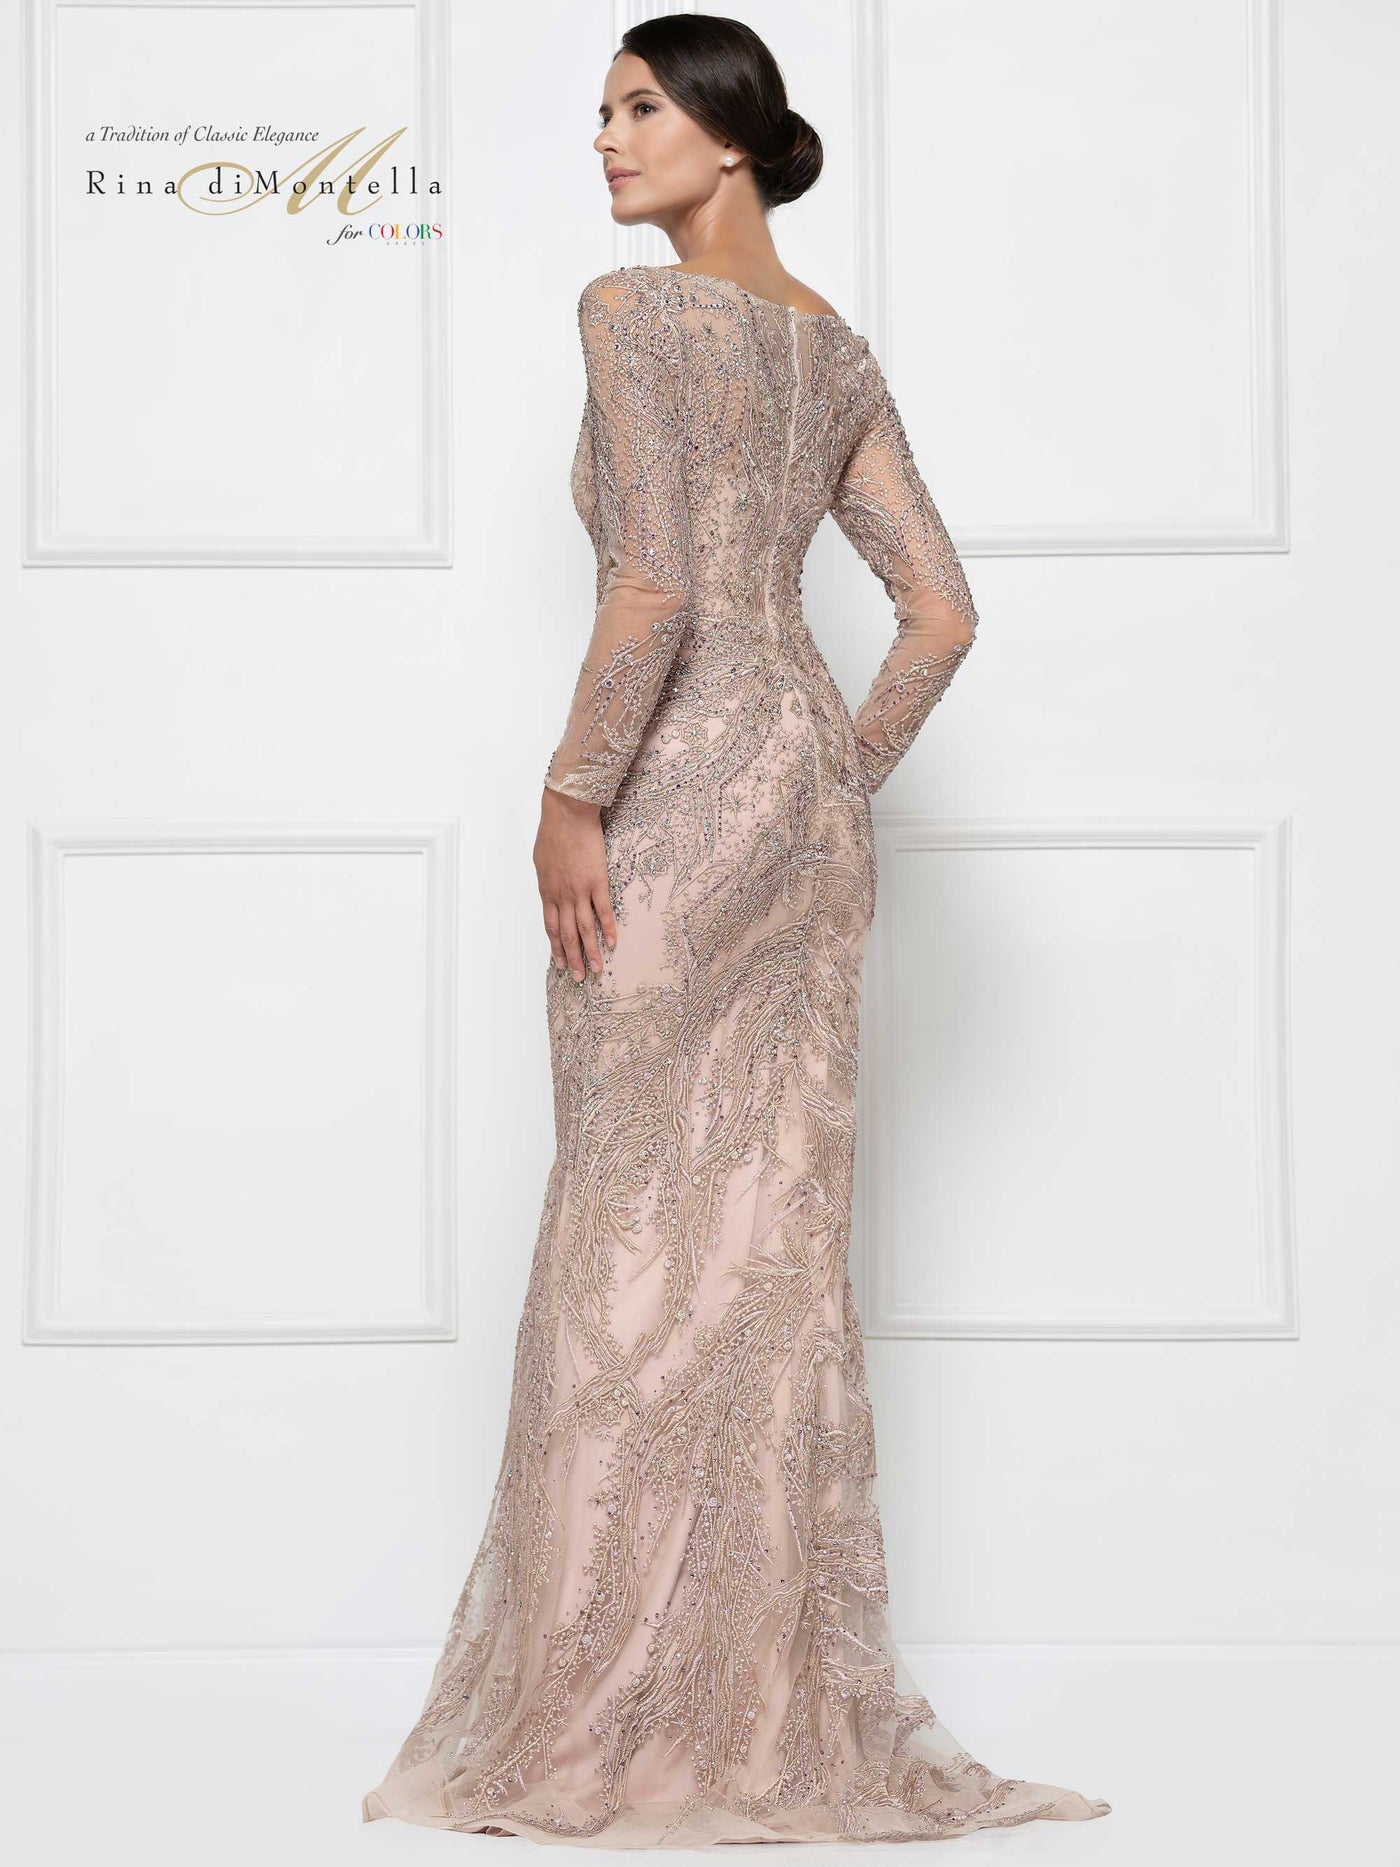 Rina Di Montella - RD2668 Embroidered Long Sleeve Sheath Dress Mother of the Bride Dresses